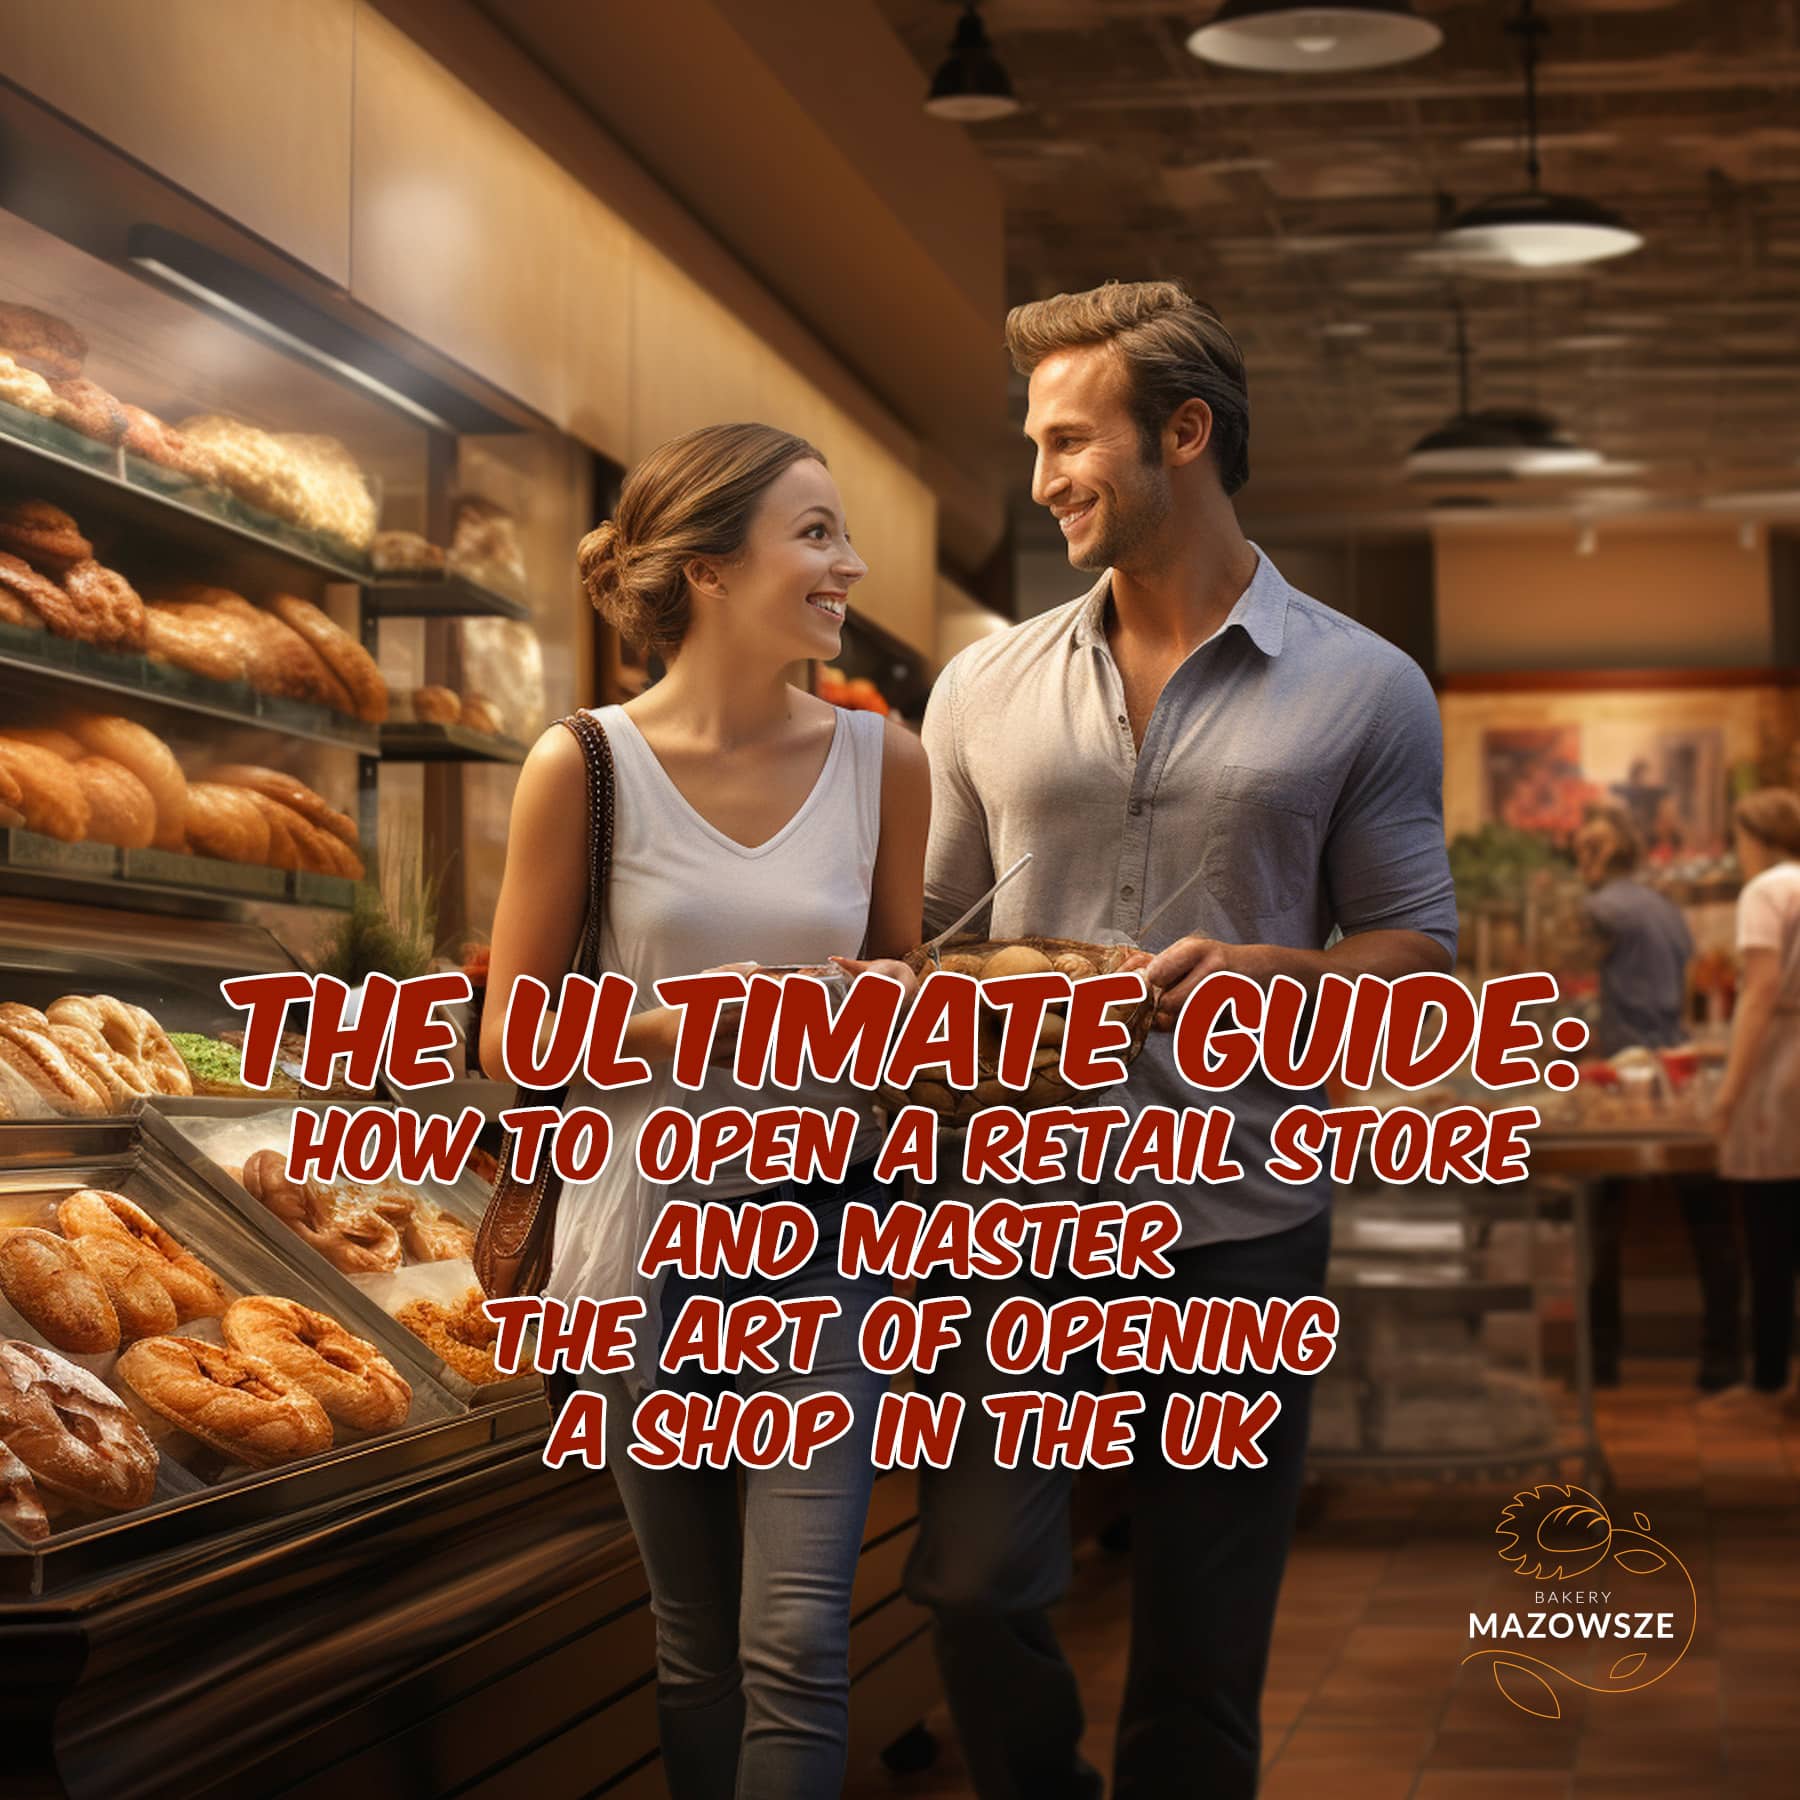 The Ultimate Guide: How to Open a Retail Store and Master the Art of Opening a Shop in the UK